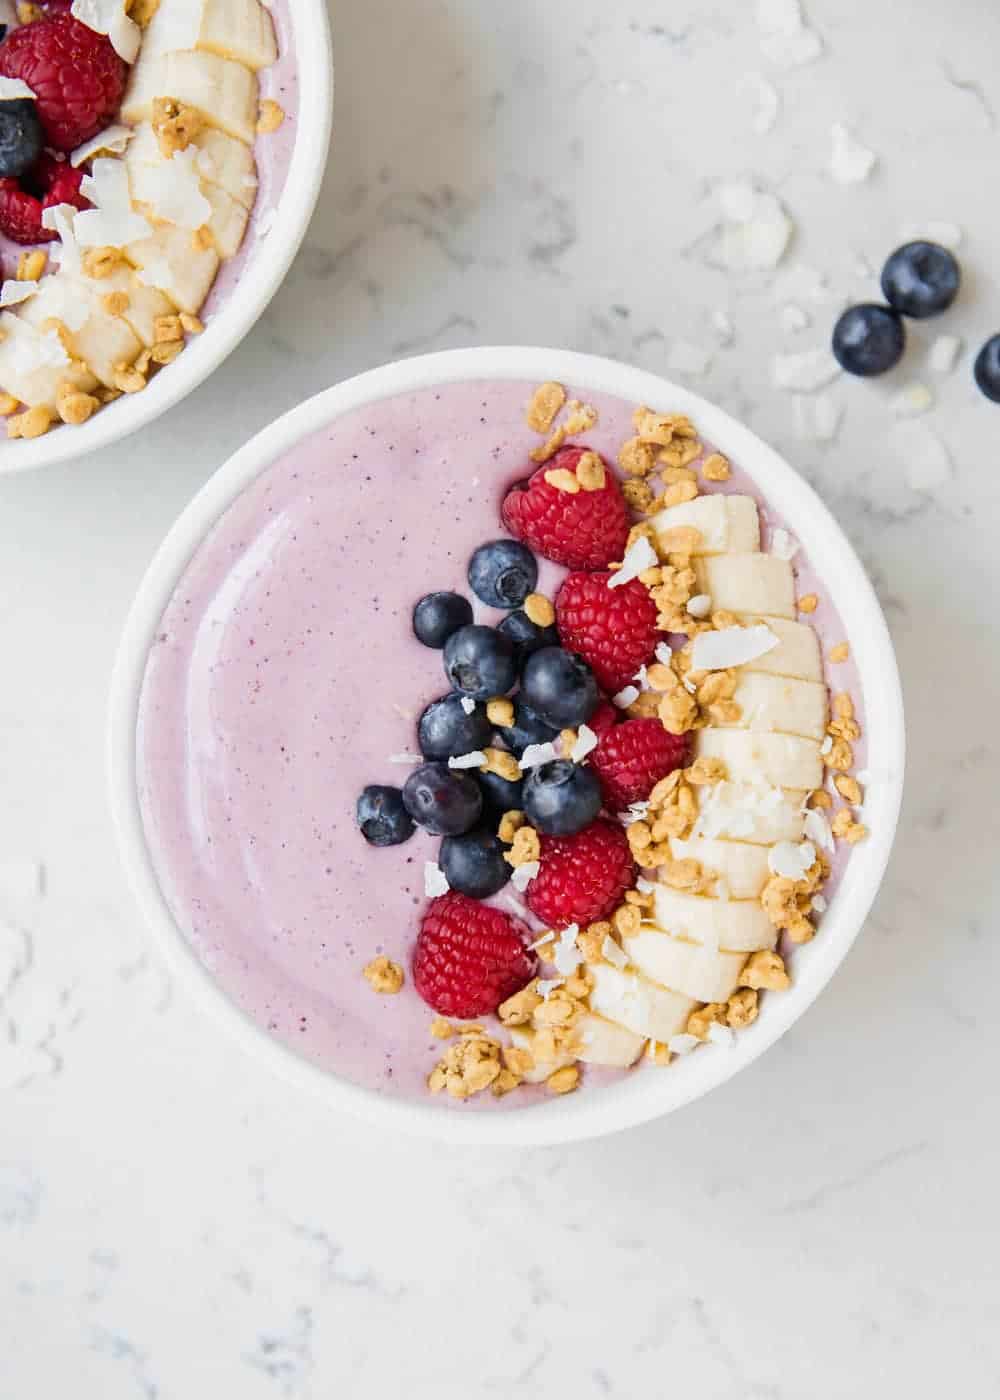 Smoothie bowl topped with fruit and granola.